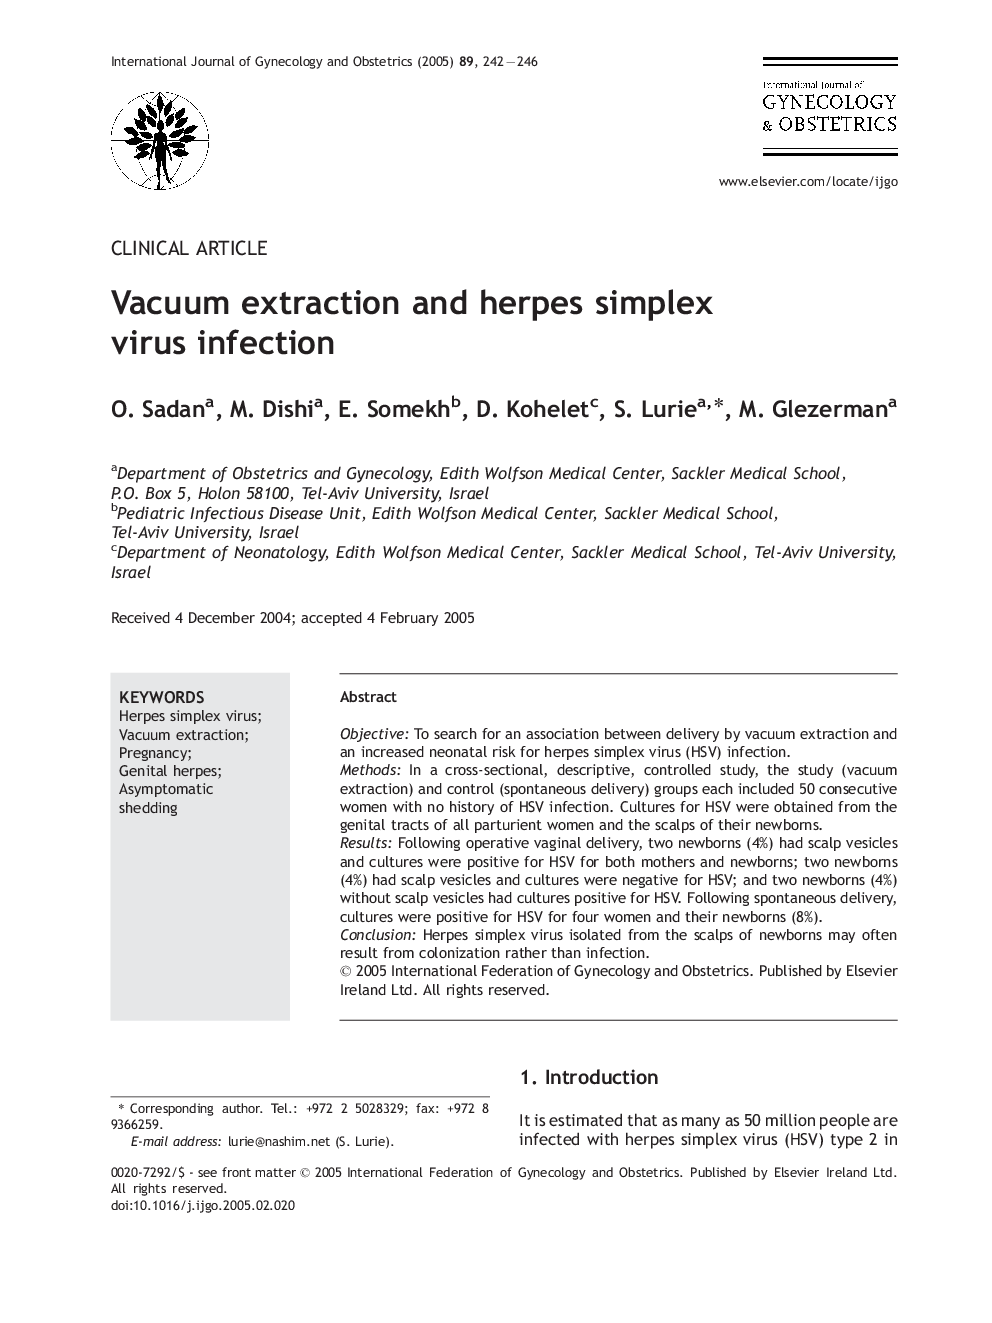 Vacuum extraction and herpes simplex virus infection